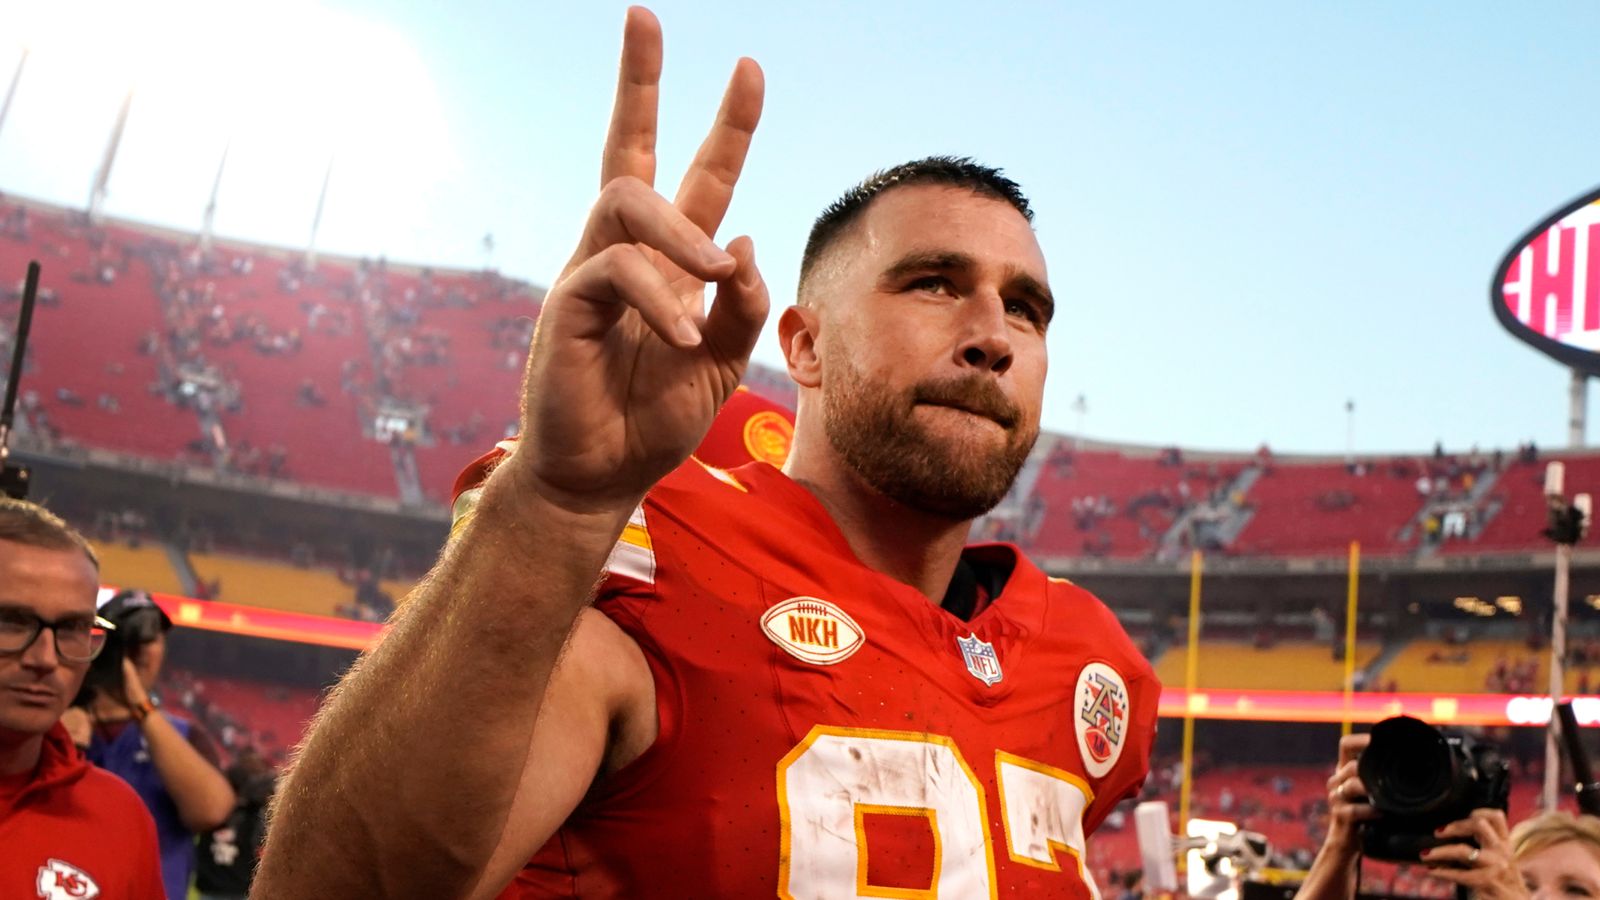 Clyde Edwards expressed his gratitude towards Travis Kelce for his role in the return of the Chiefs running back to Kansas City. Edwards highlighted Kelce's support and assistance, emphasizing how pivotal it was in his decision to come back. He couldn't be more thankful to the Chiefs TE Kelce for his help and encouragement throughout the process.